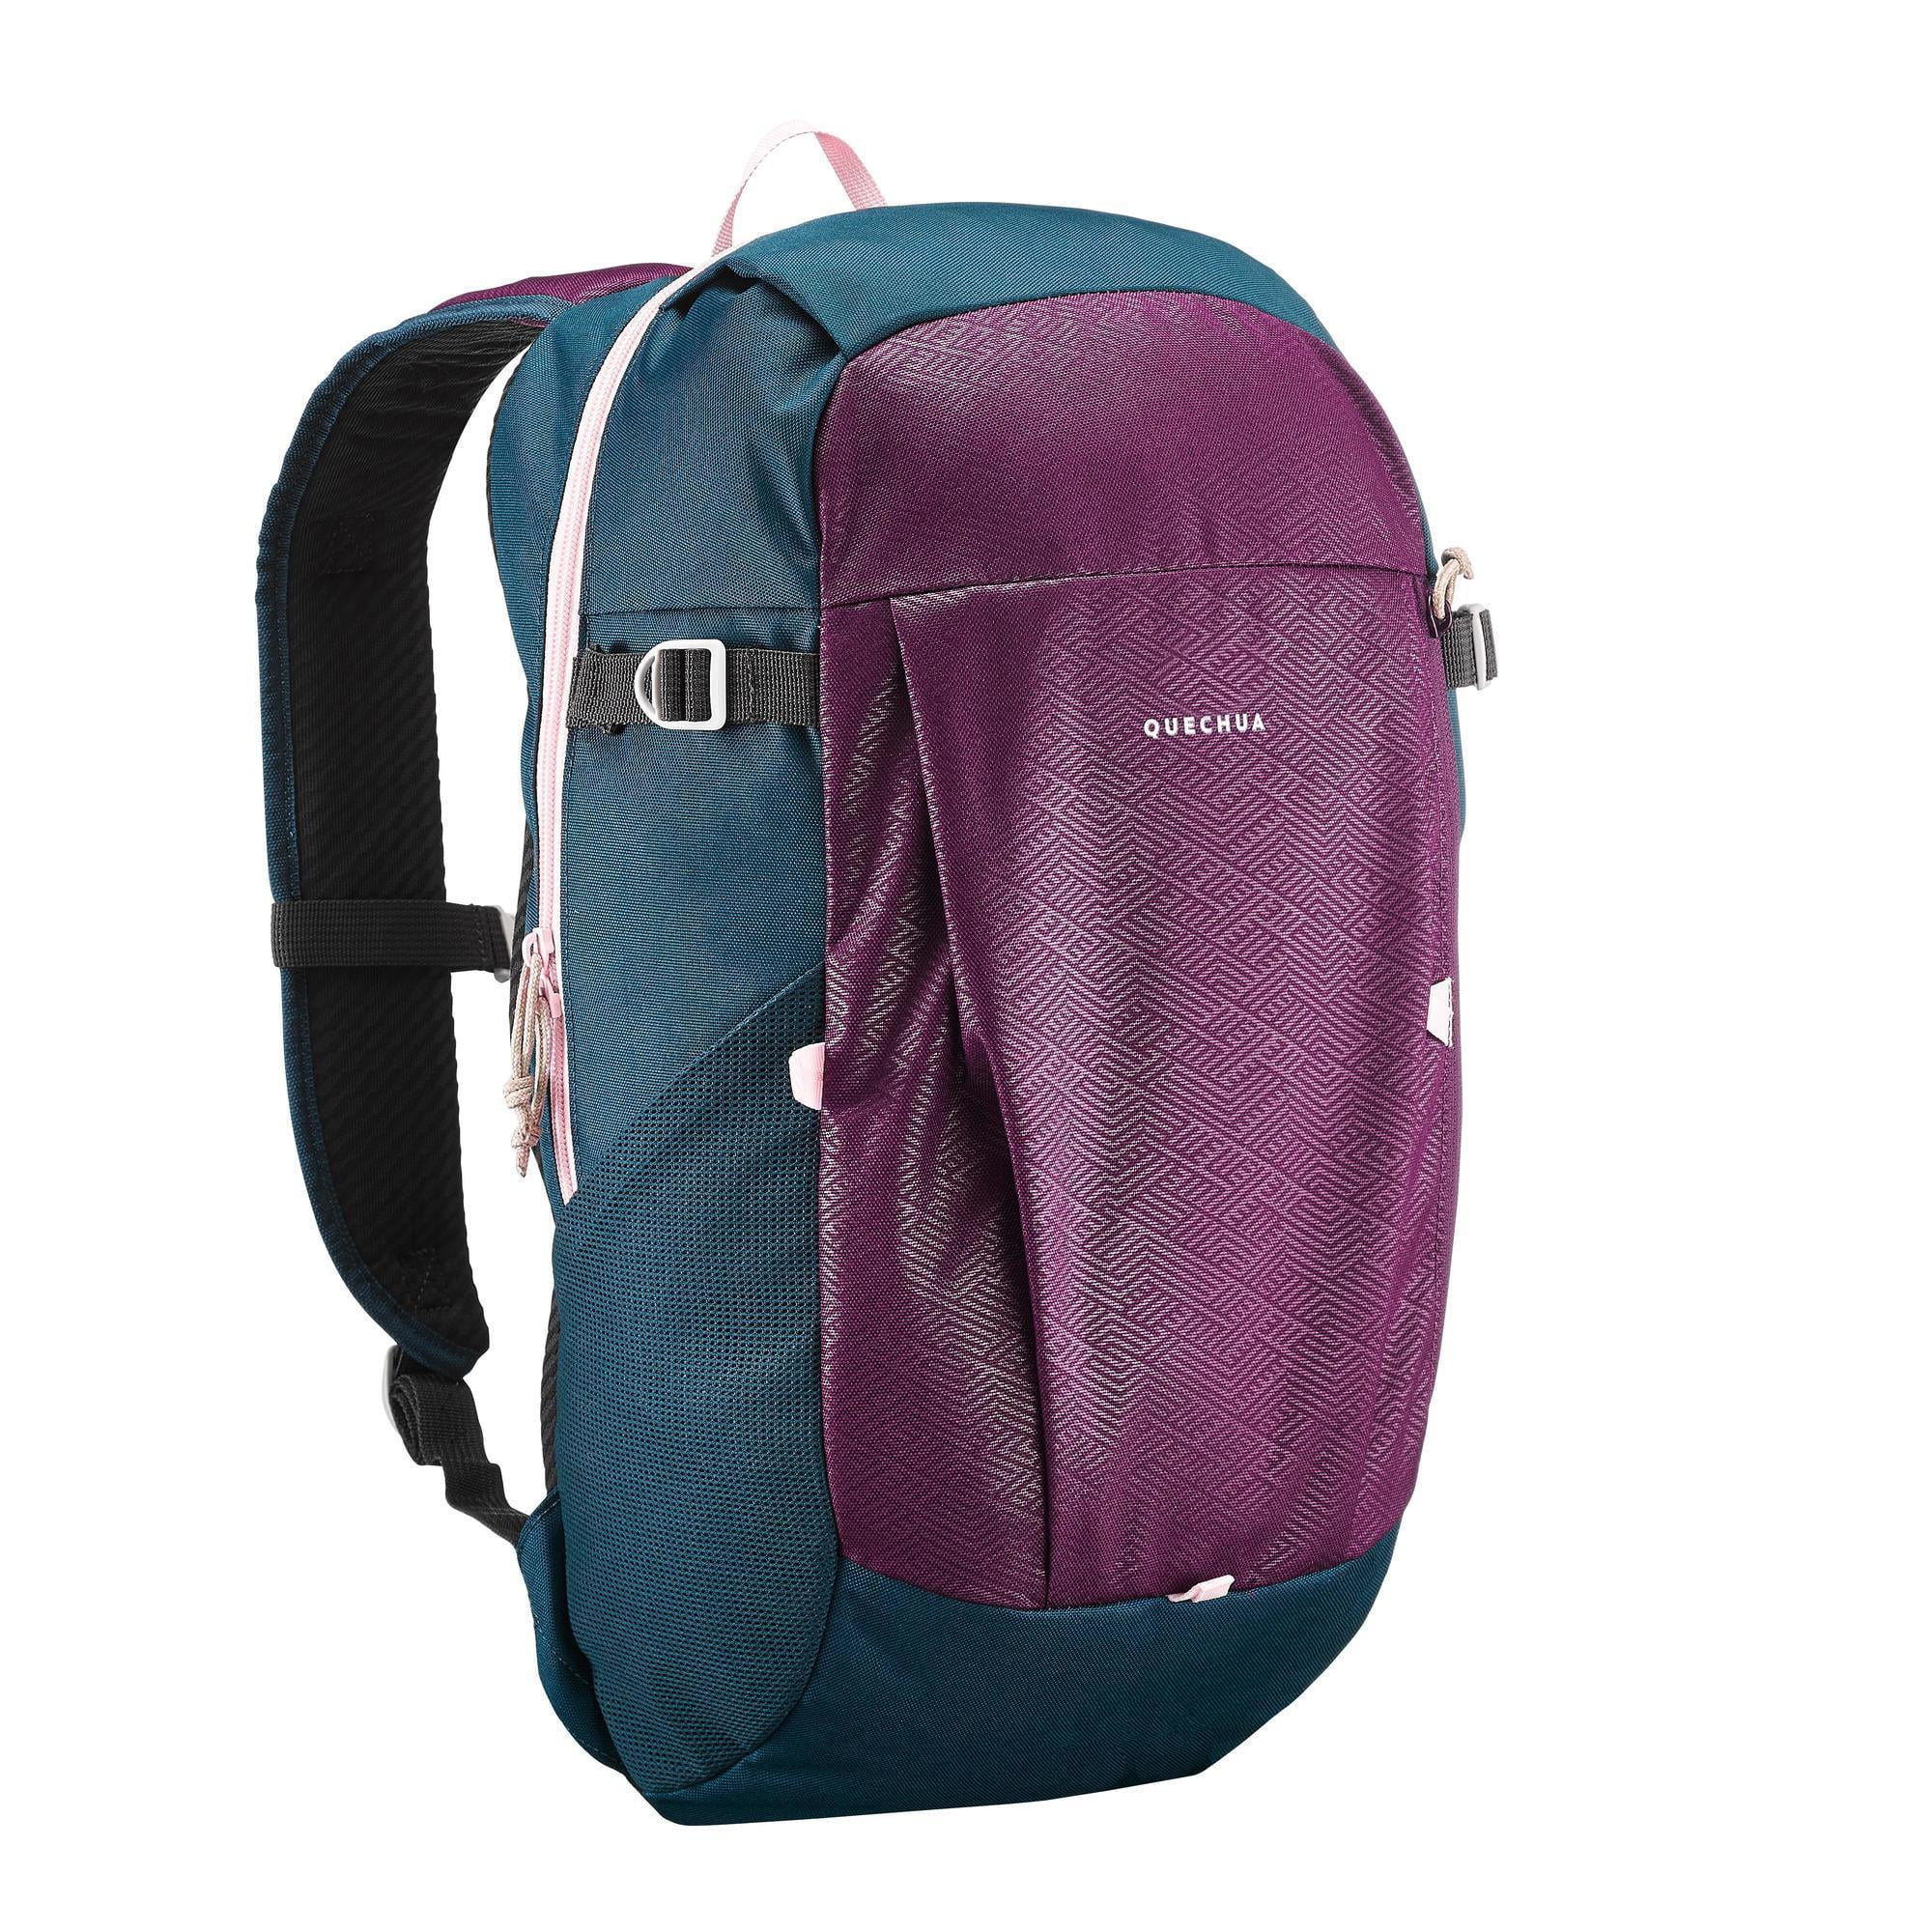 Quechua By Decathlon Unisex Blue Black Hiking 16L Backpack Price In India,  Full Specifications Offers | lupon.gov.ph